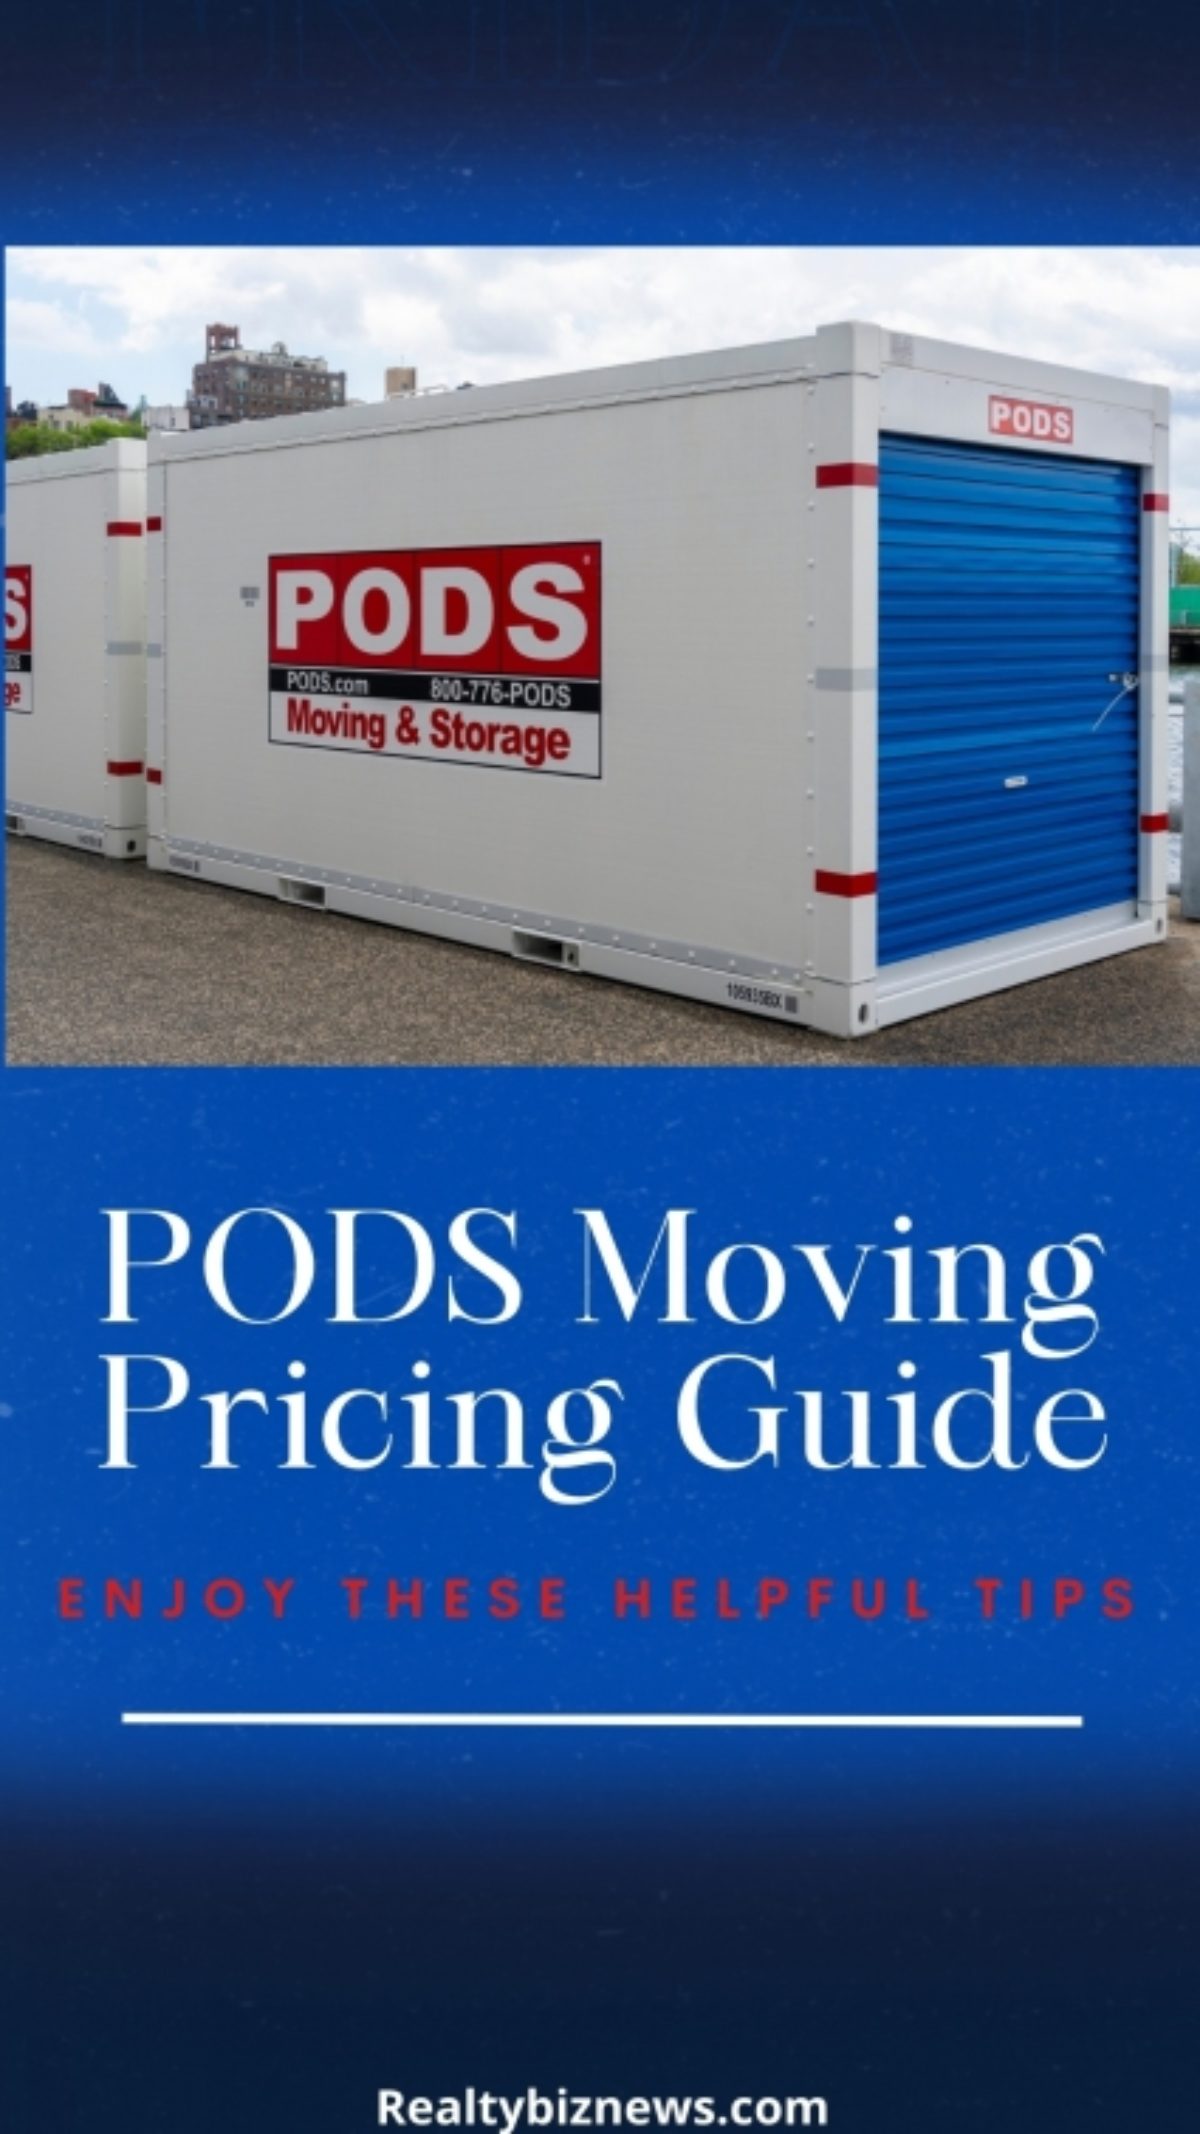 What to Expect When You Are Moving with PODS